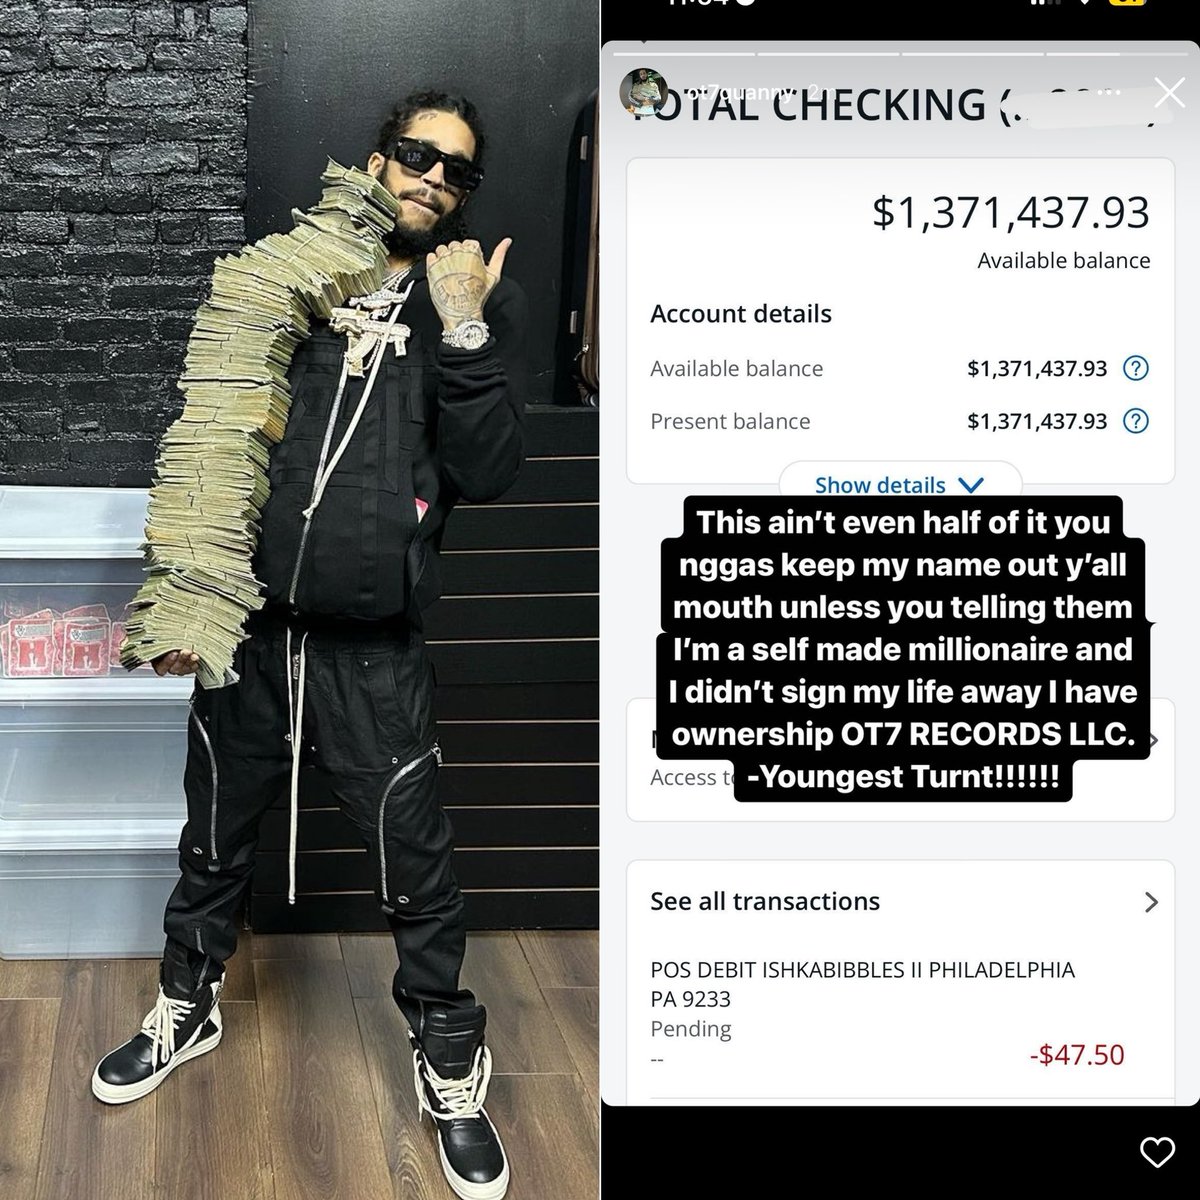 Philly rapper OT7 Quanny shows off $1.3 million in his bank account